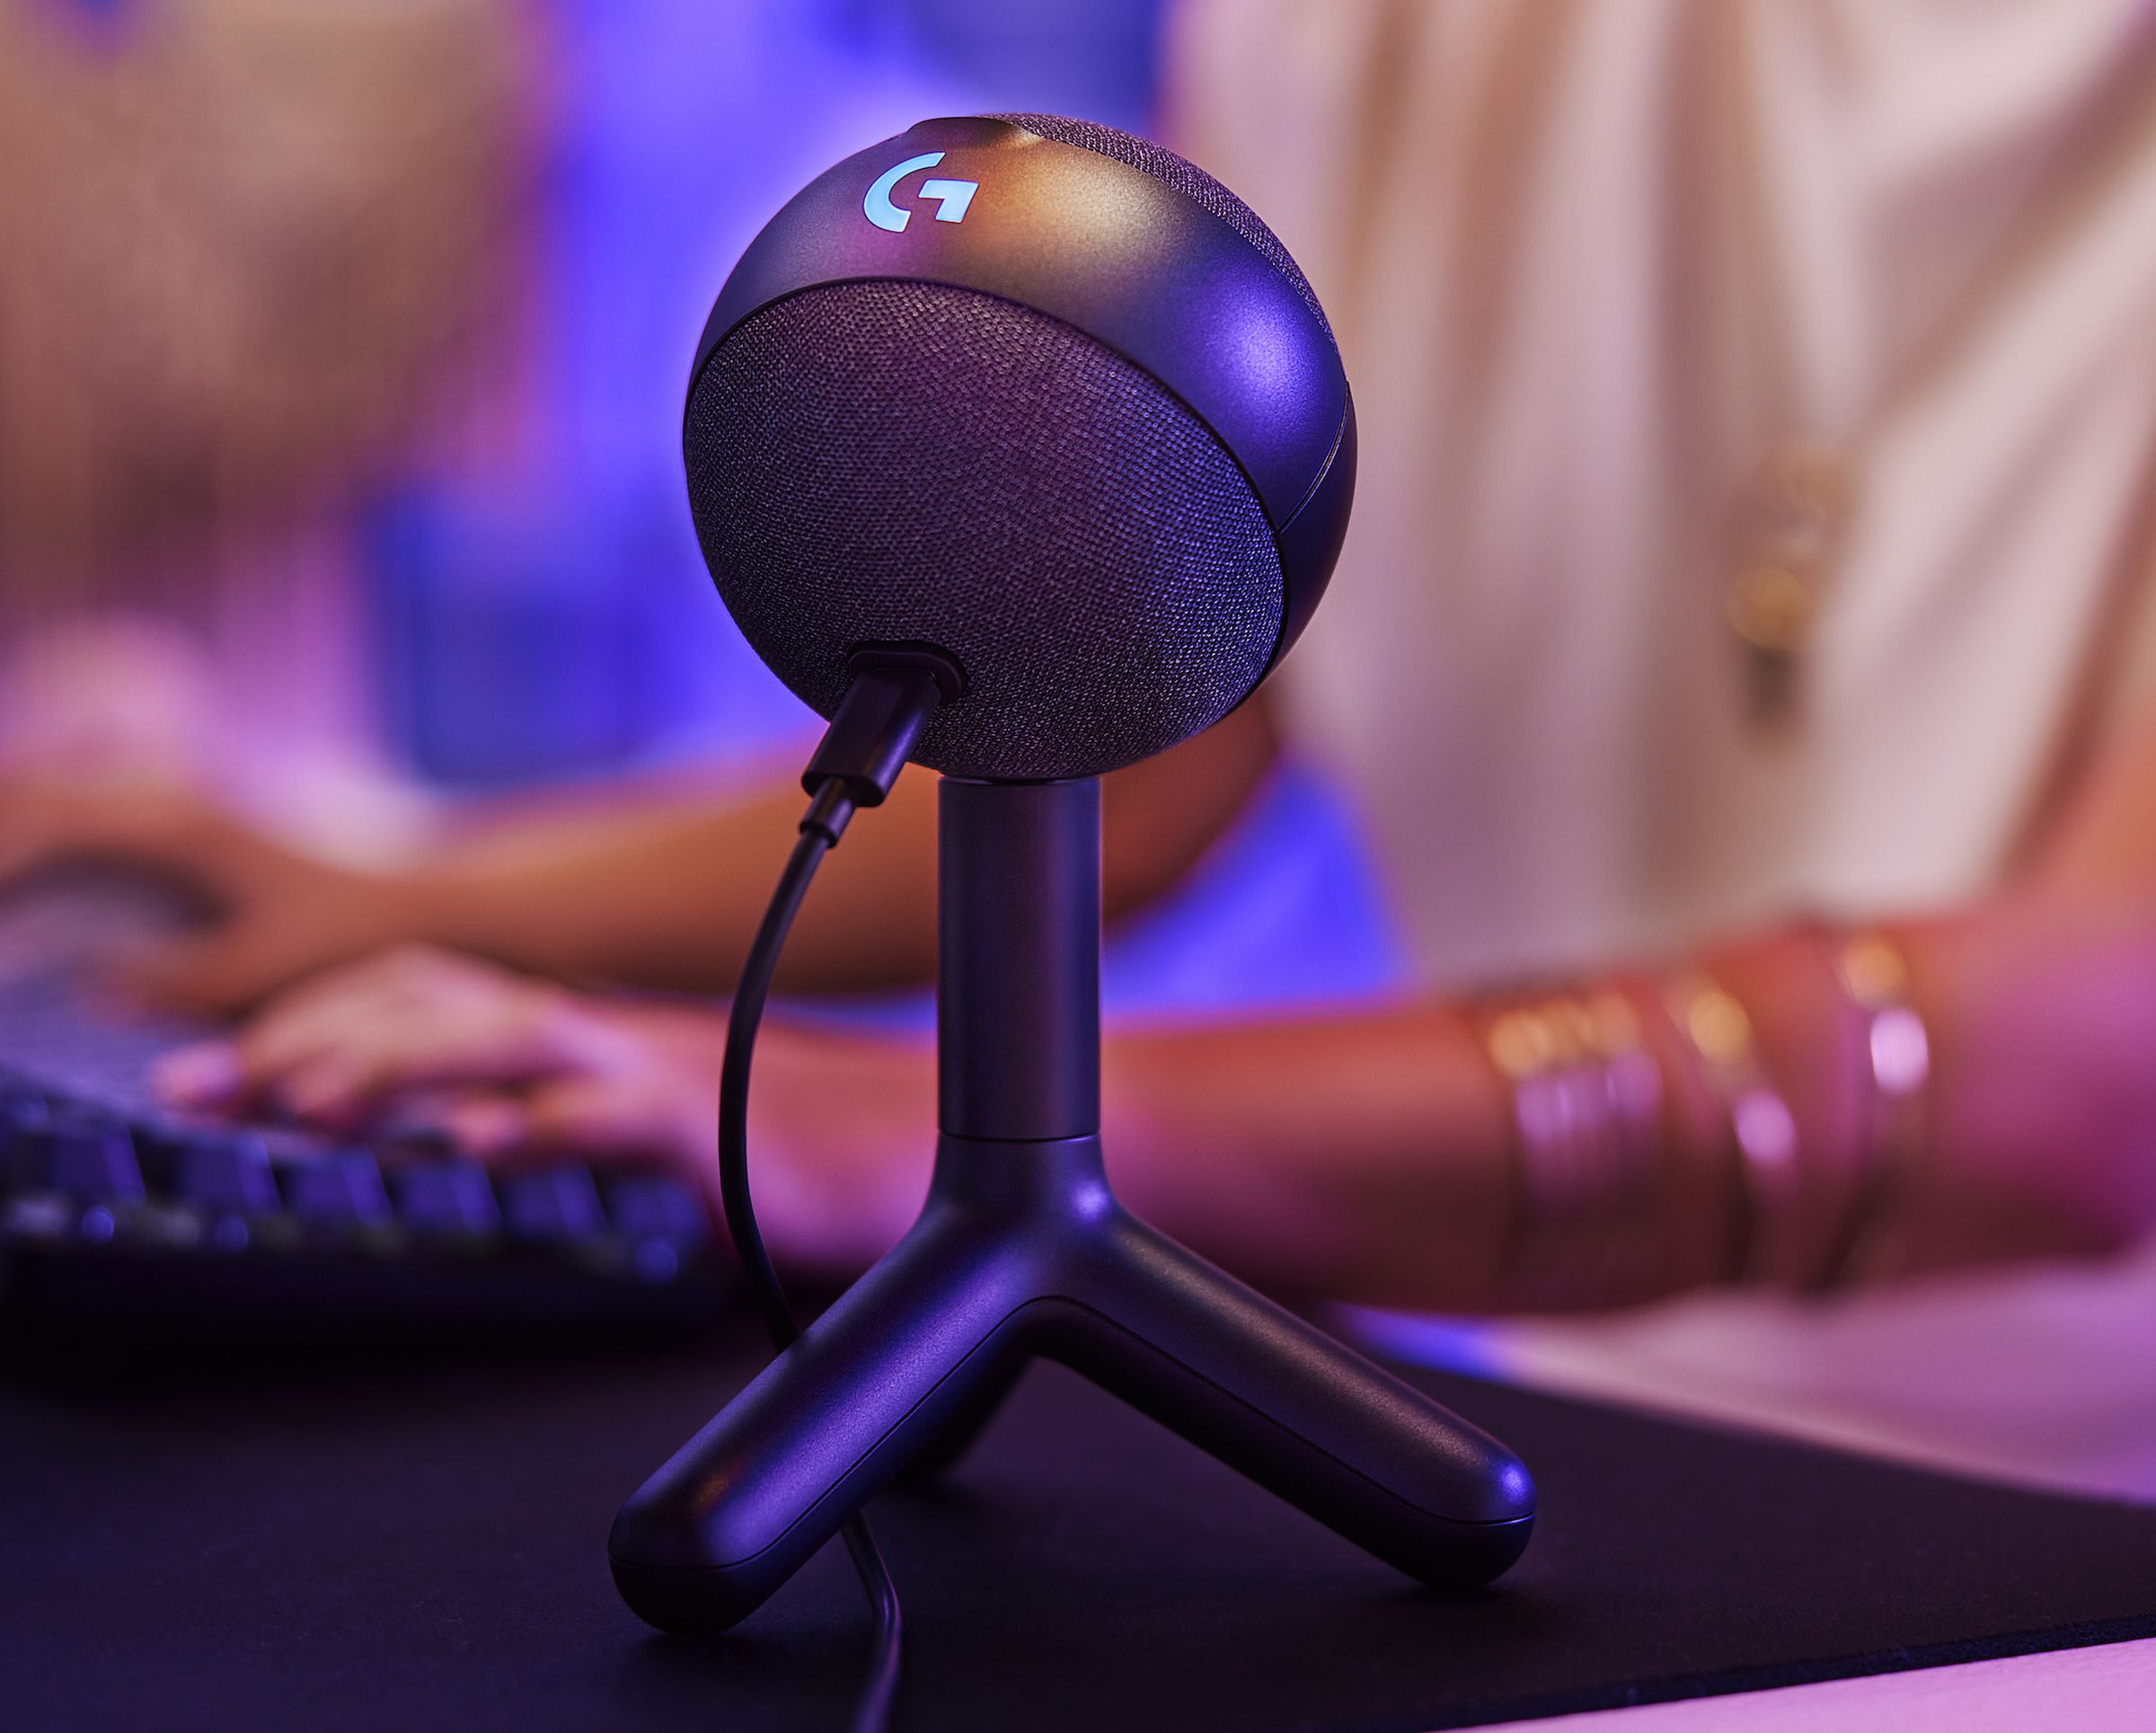 A picture of the Logitech Orb sitting on its small stand, which looks like a chicken’s foot.